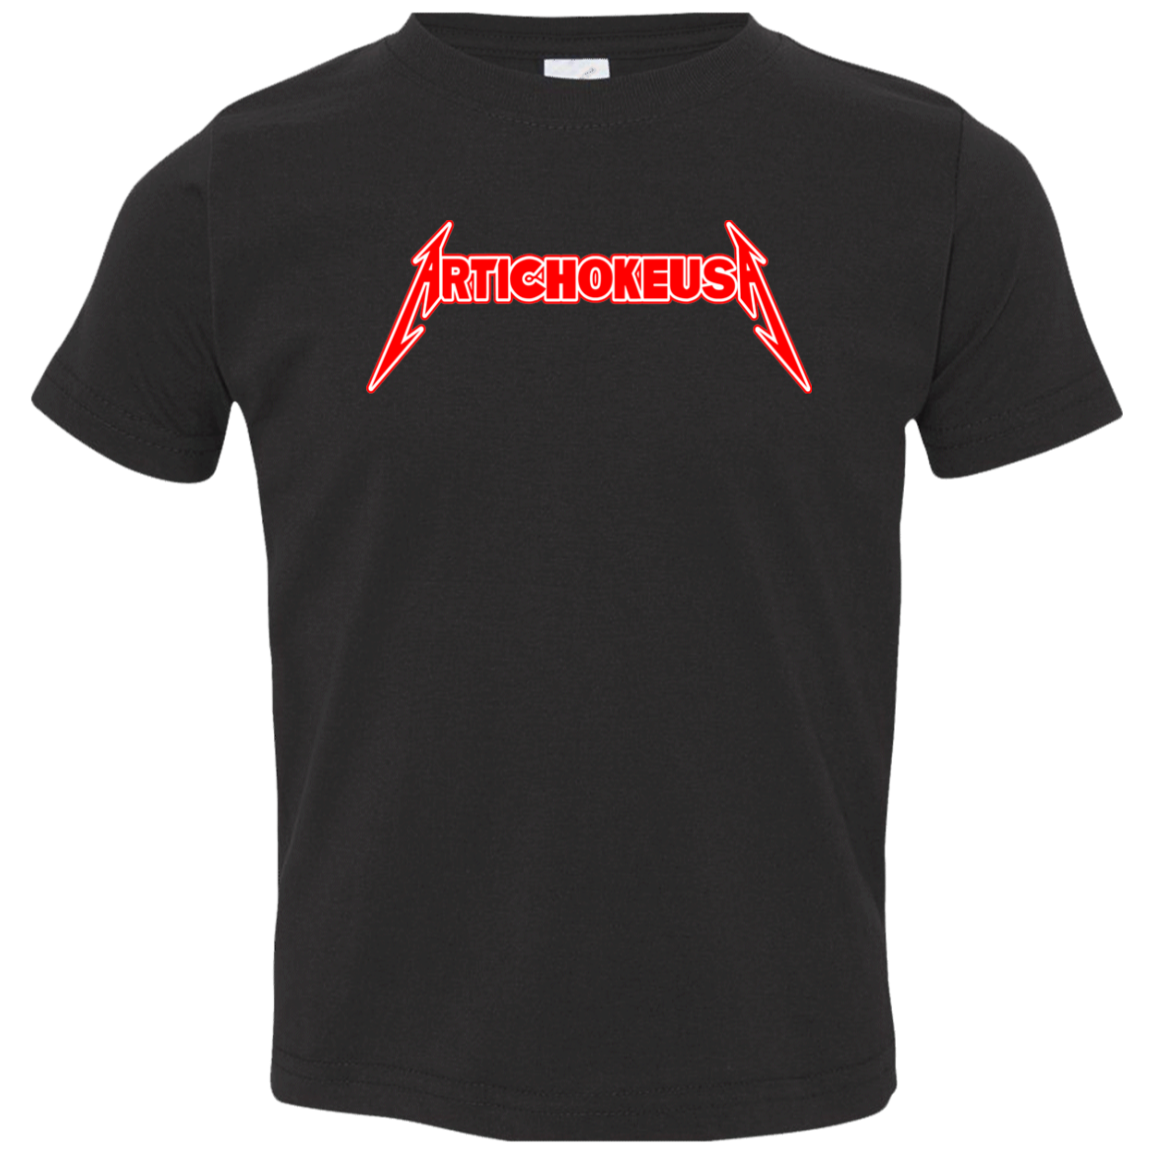 ArtichokeUSA Custom Design. Metallica Style Logo. Let's Make One For Your Project. Toddler Jersey T-Shirt